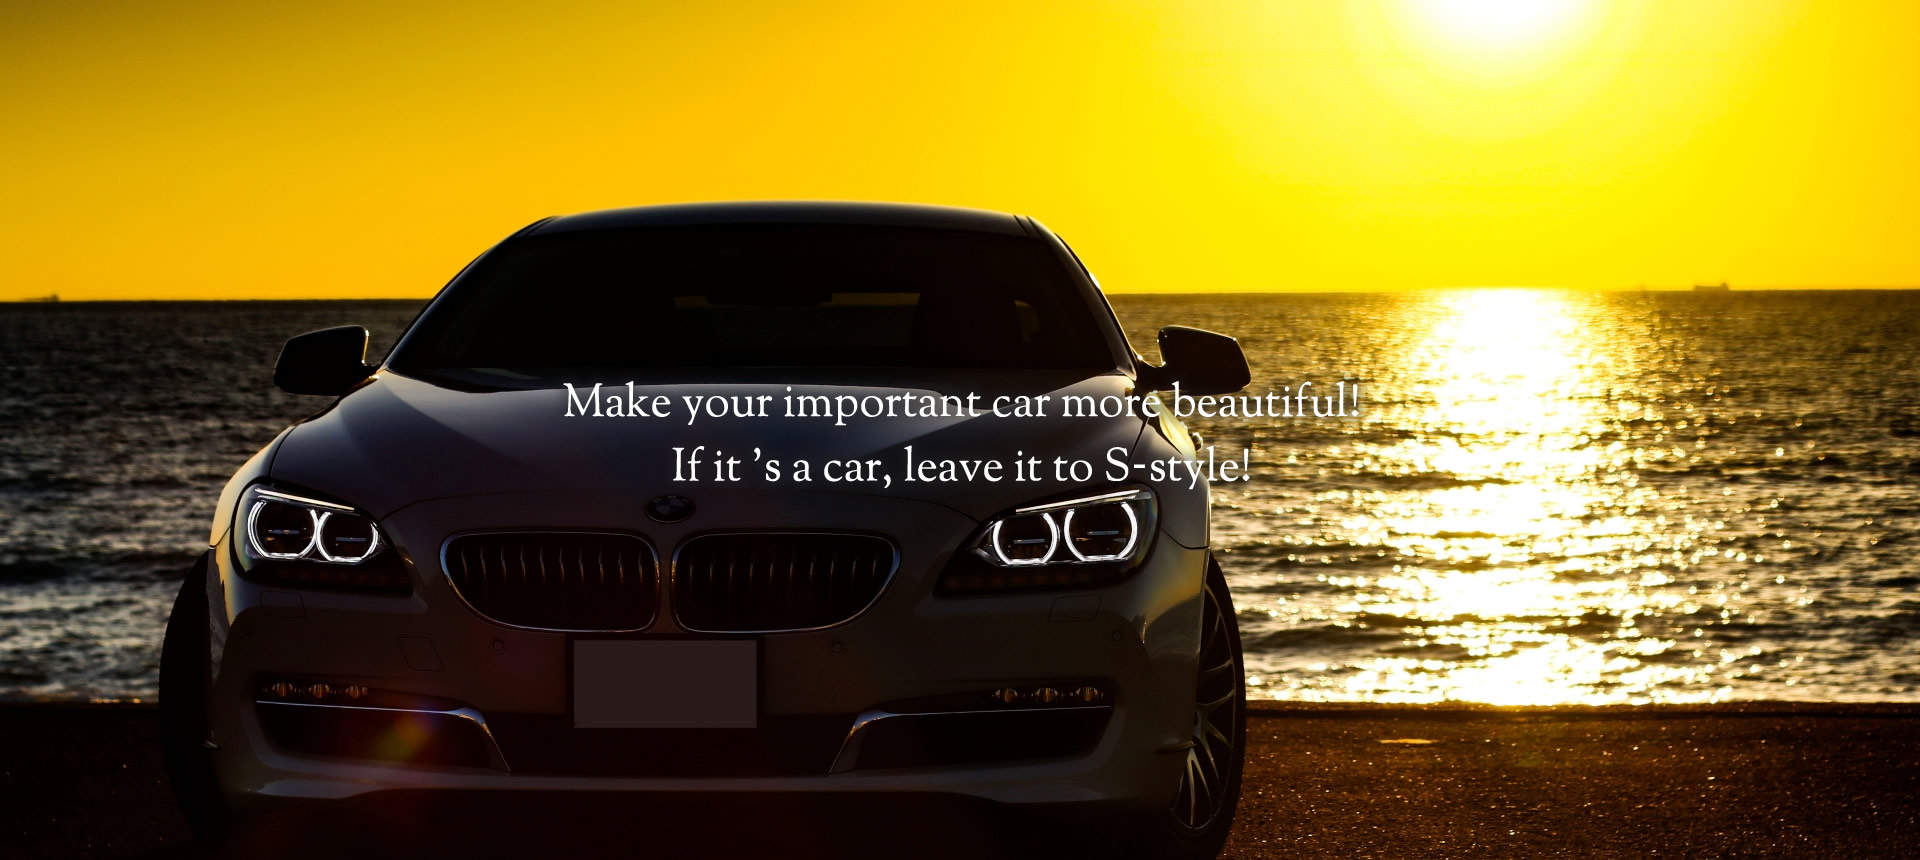 Make your important car more beautiful!